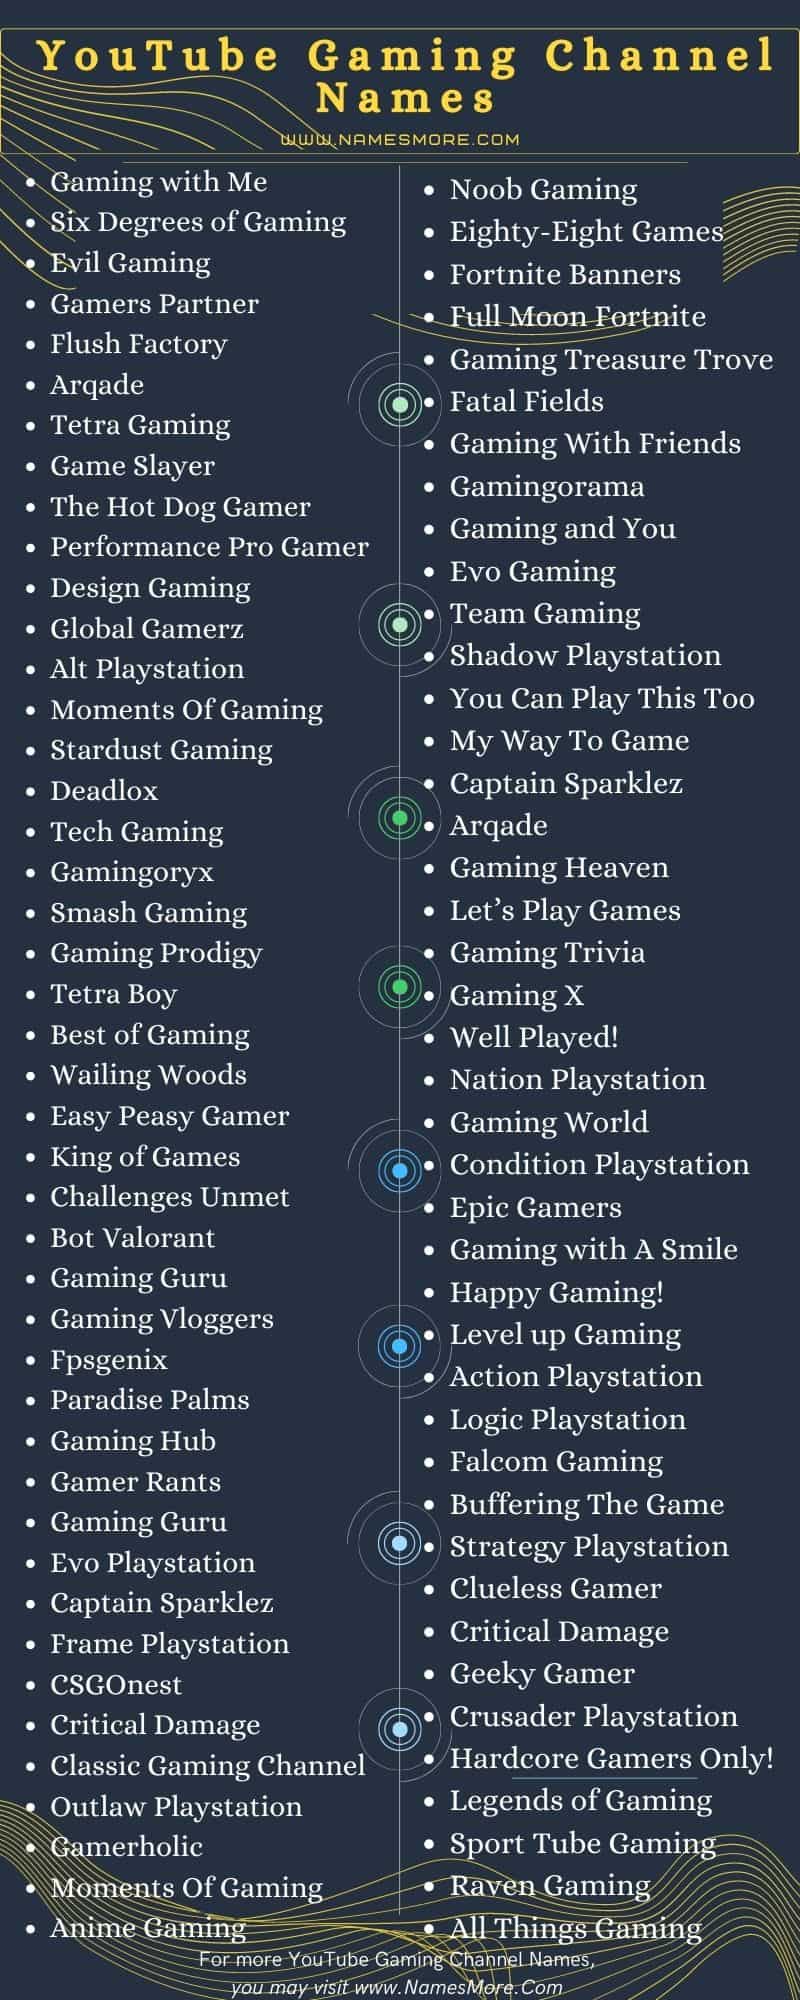 2600+ YouTube Gaming Channel Names [Creative & Unique] List Infographic